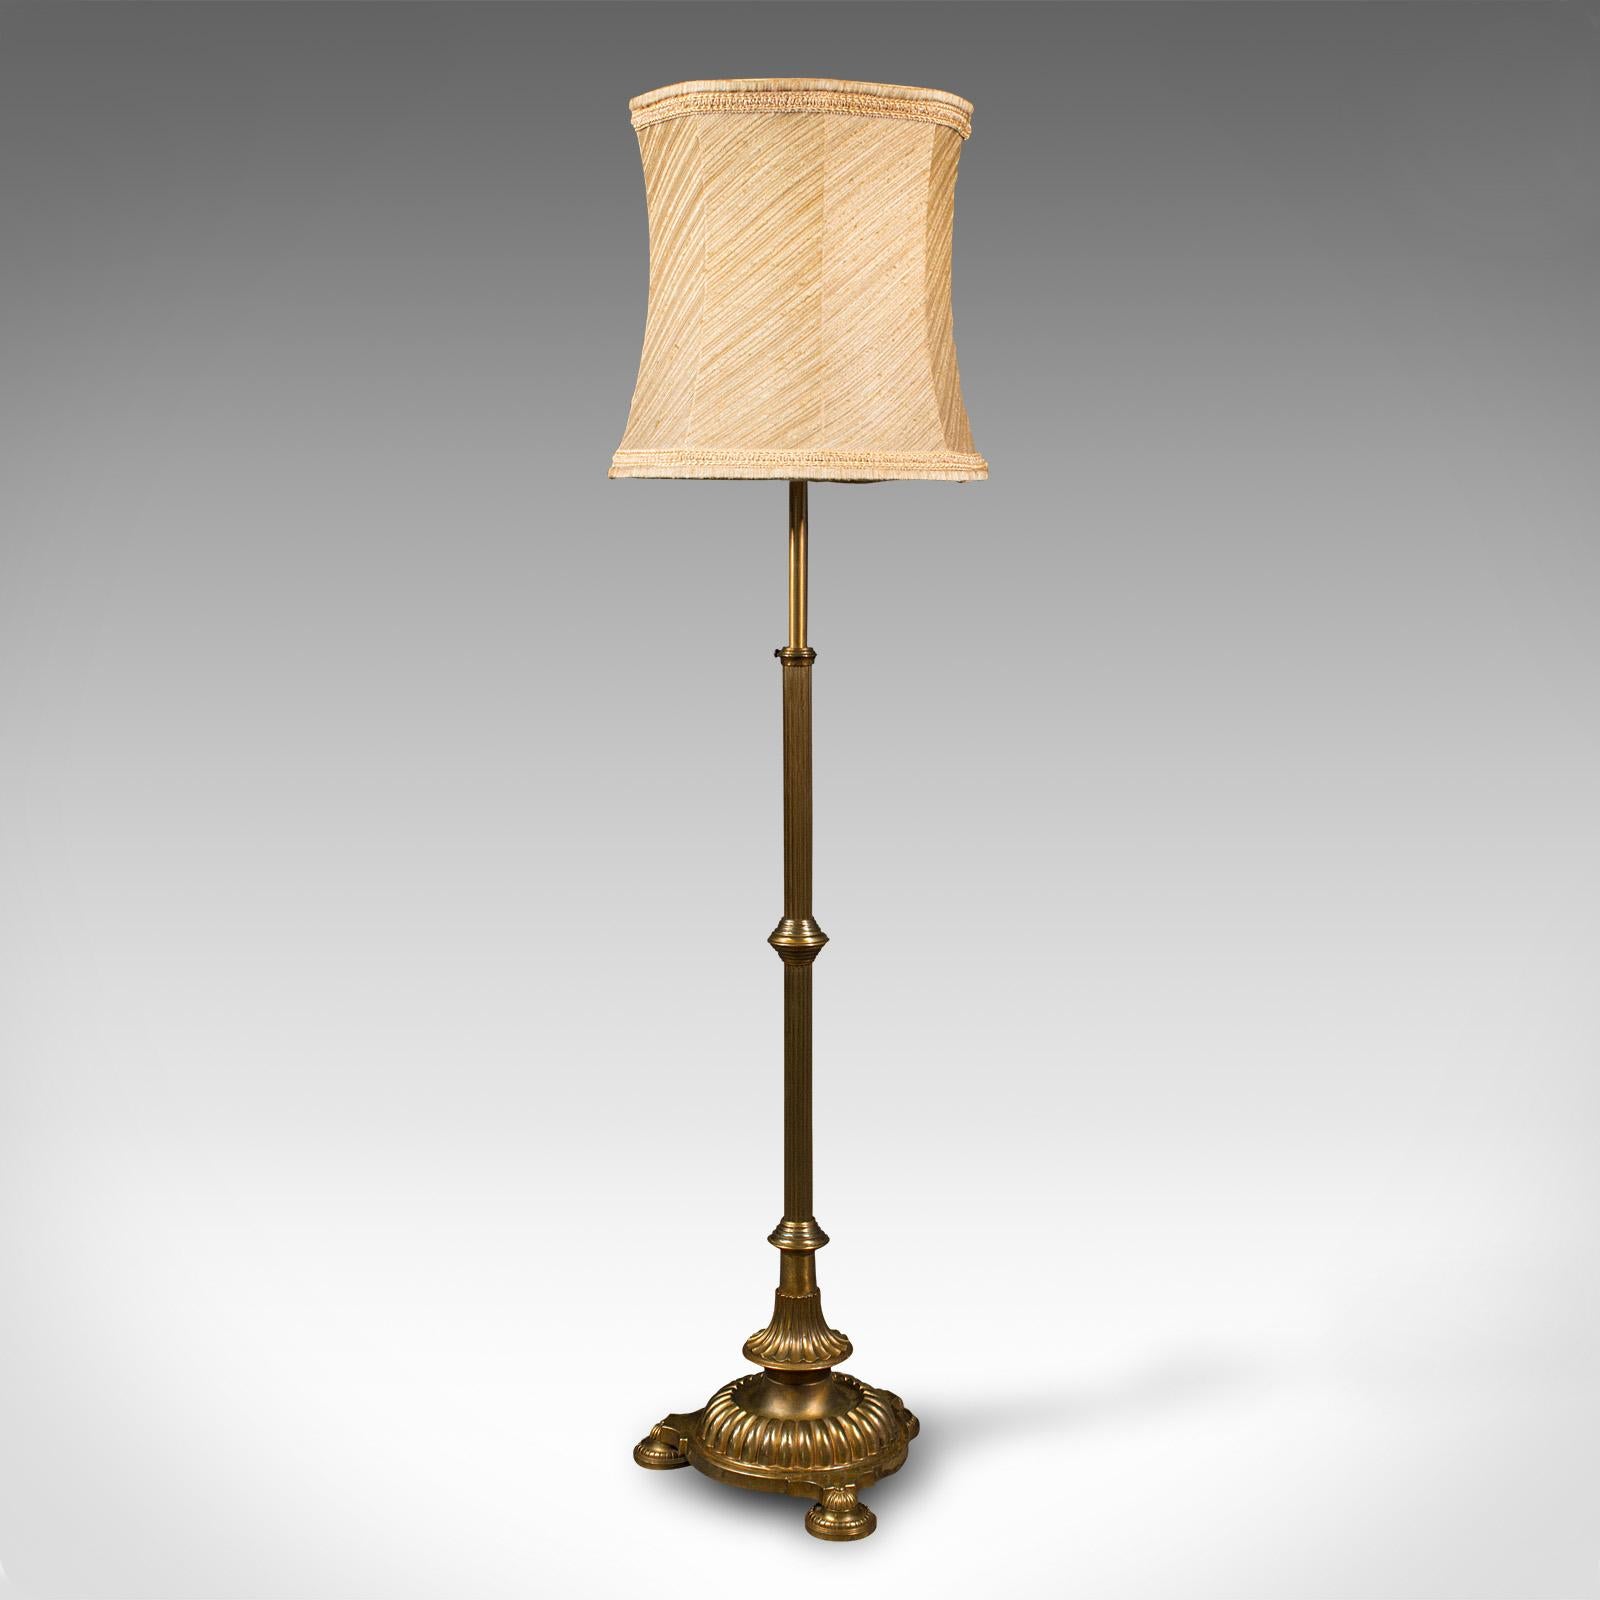 This is a tall vintage standard lamp. An English, heavy brass adjustable reading light, dating to the mid 20th century, circa 1940.

Top quality, superb size and alluring finish
Displays a desirable aged patina throughout
Striking brass offers